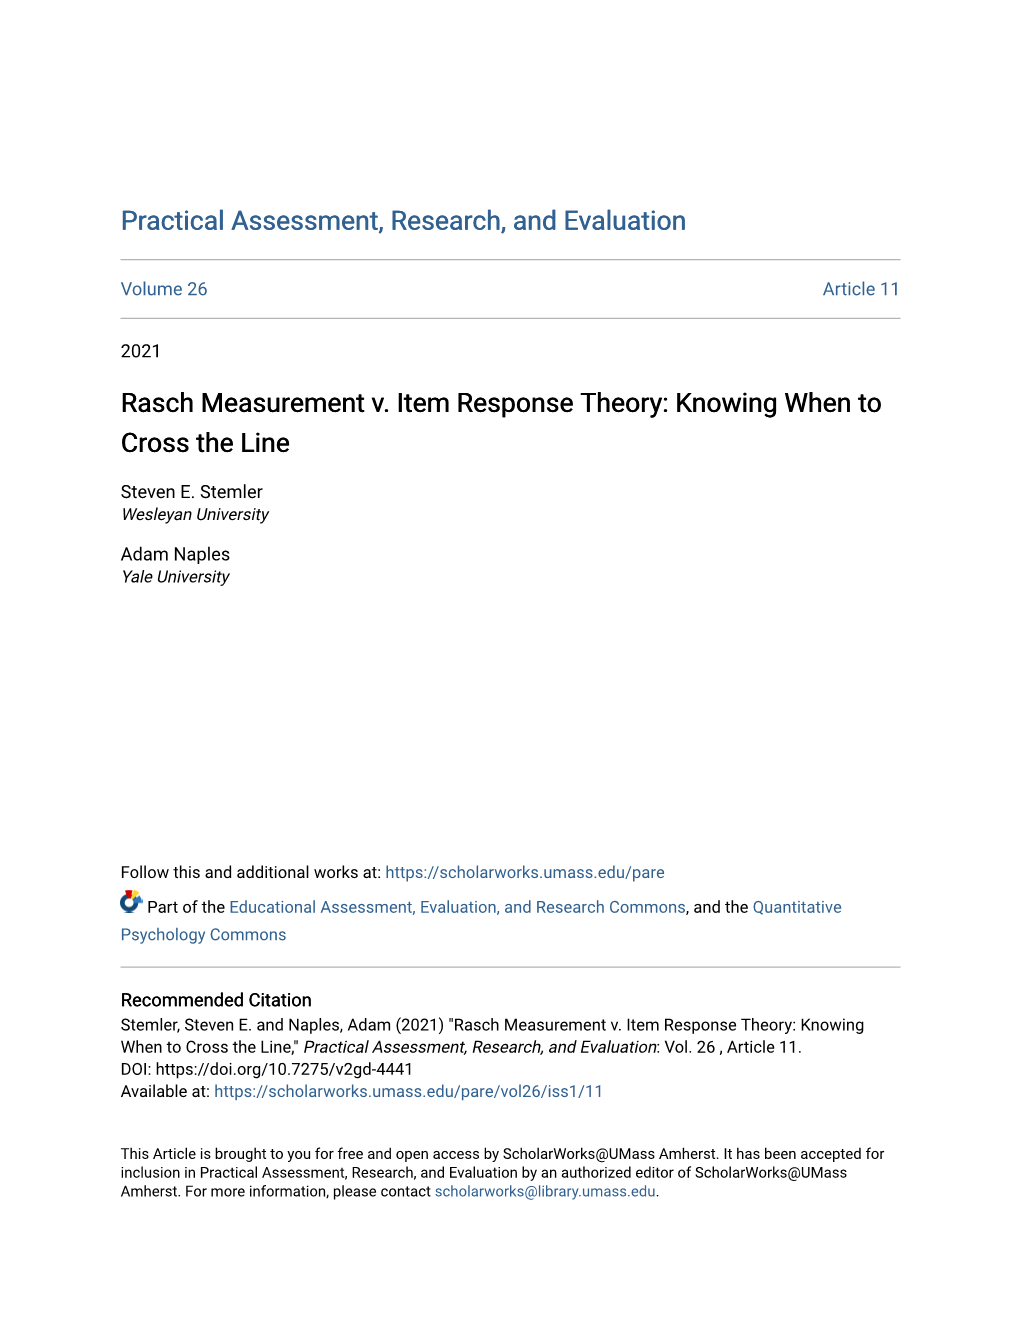 Rasch Measurement V. Item Response Theory: Knowing When to Cross the Line